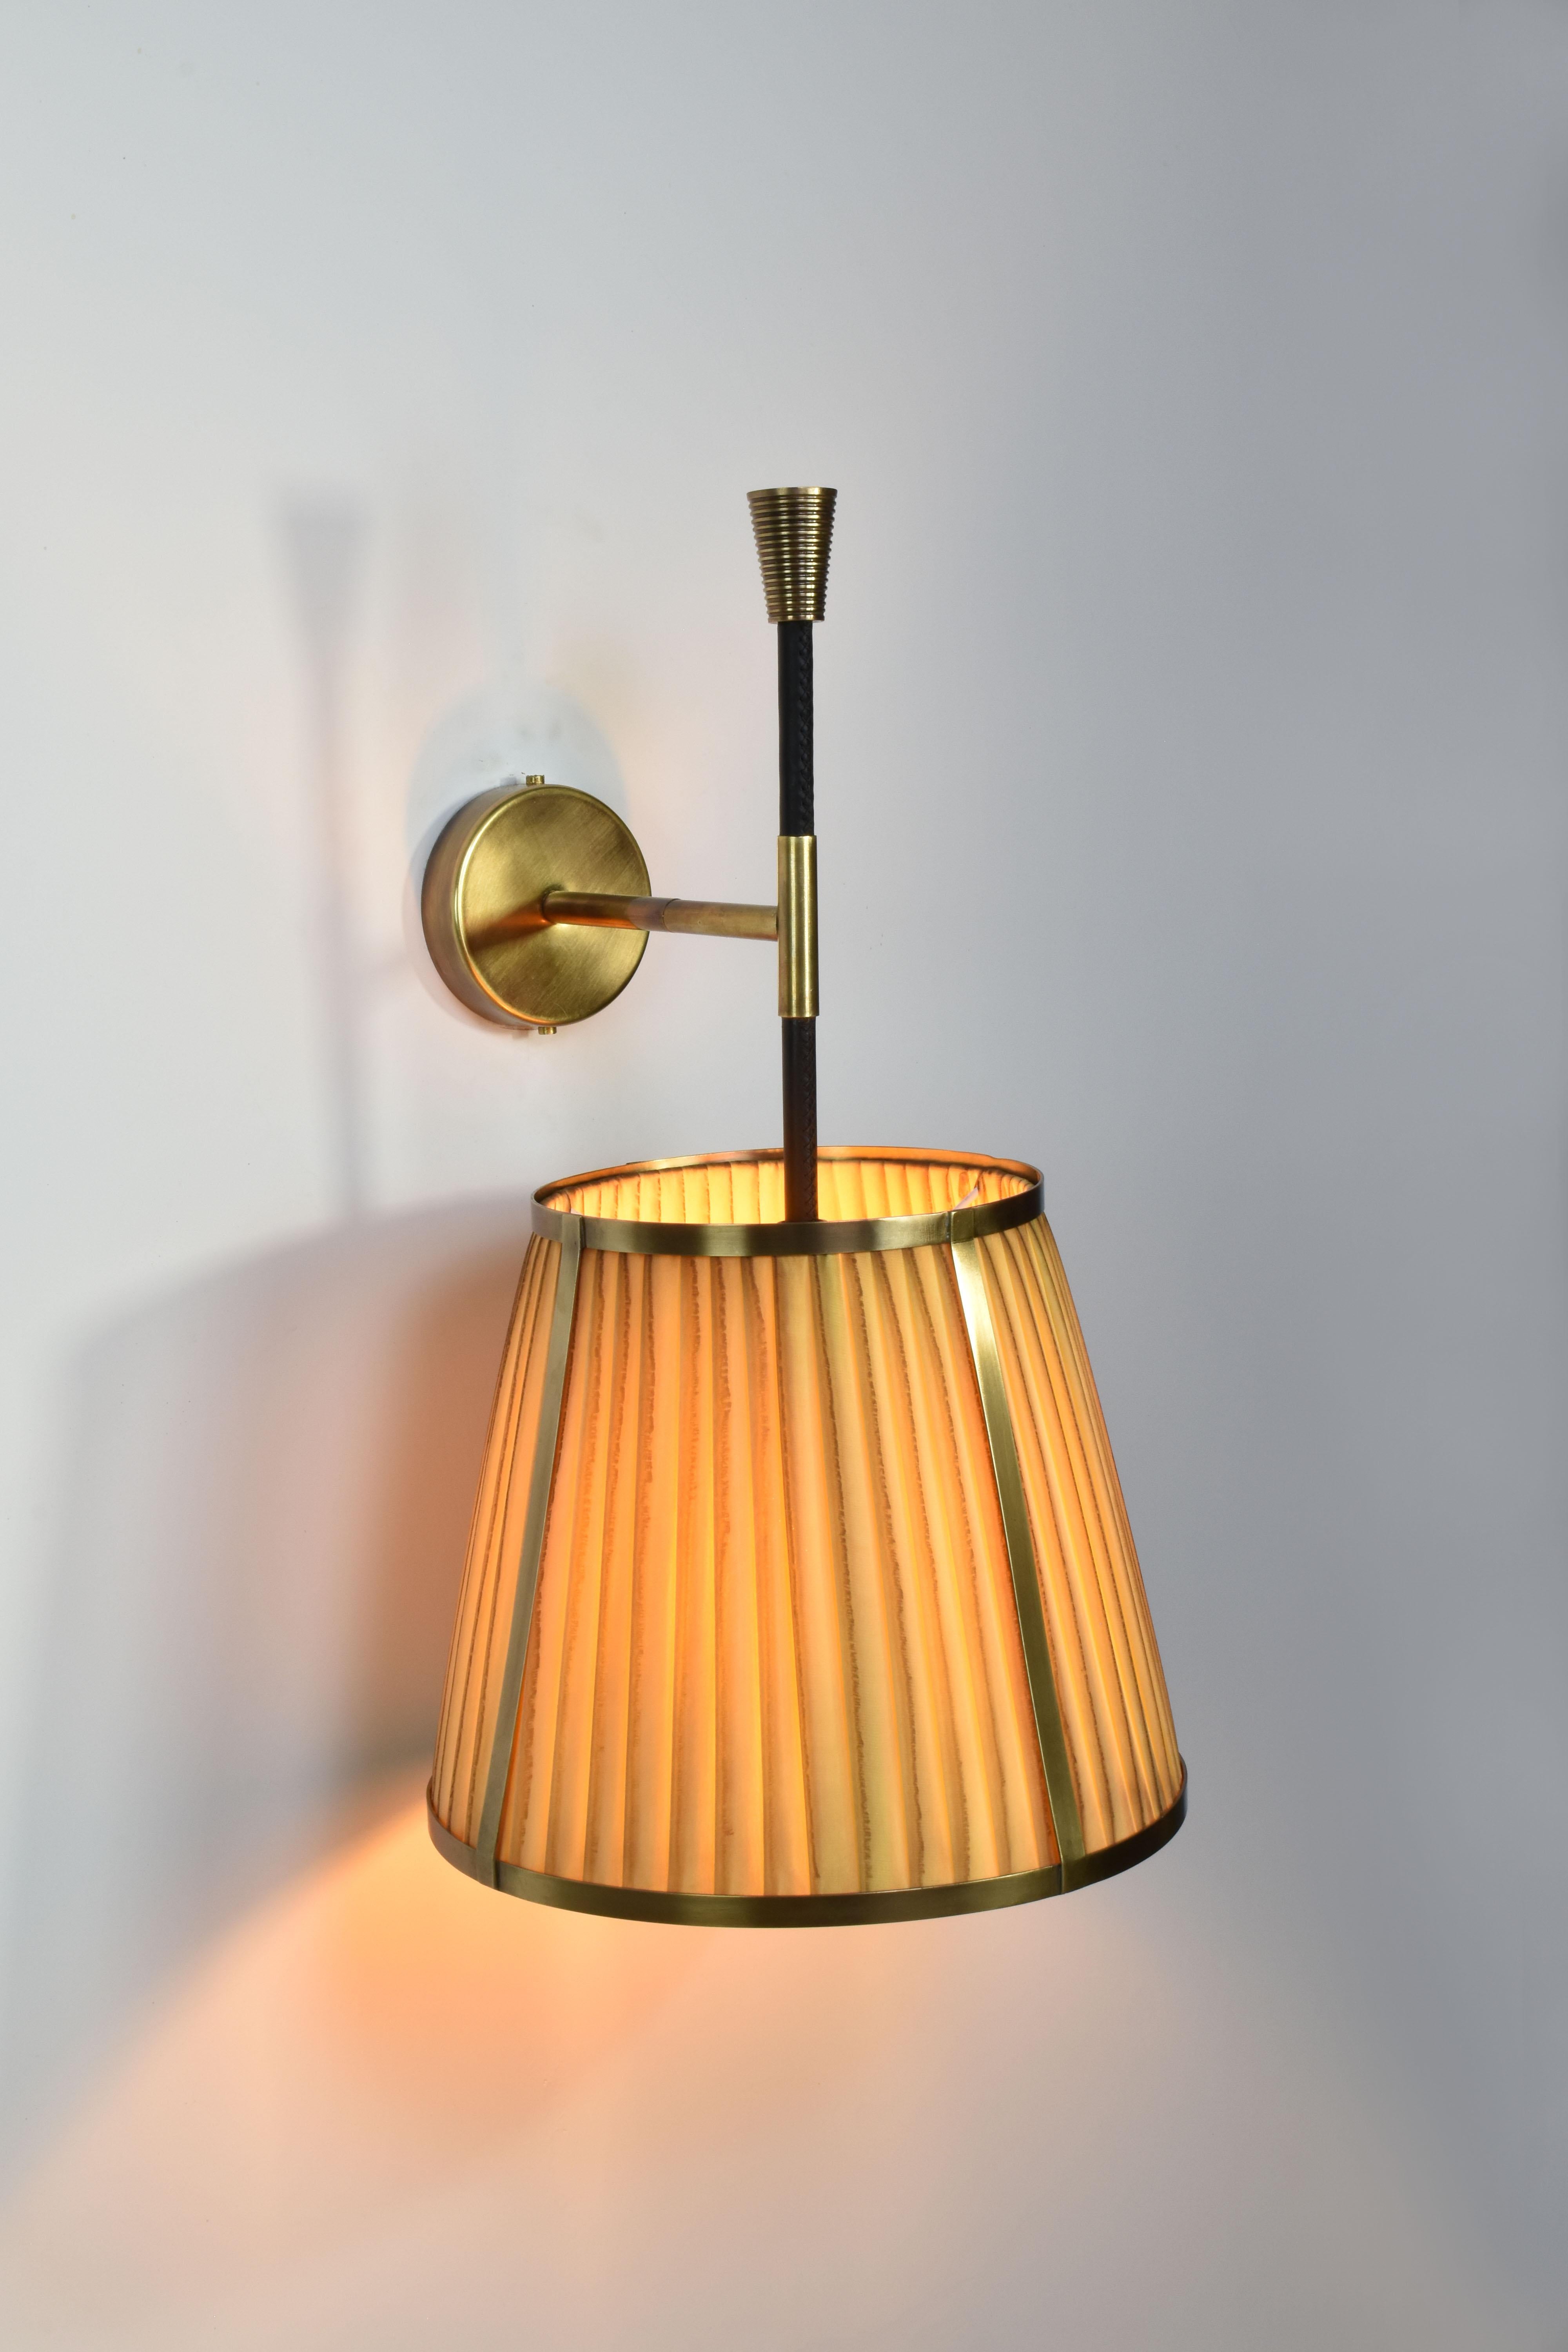 Caeli-W4 Brass and Fabric Sconce, JAS For Sale 4